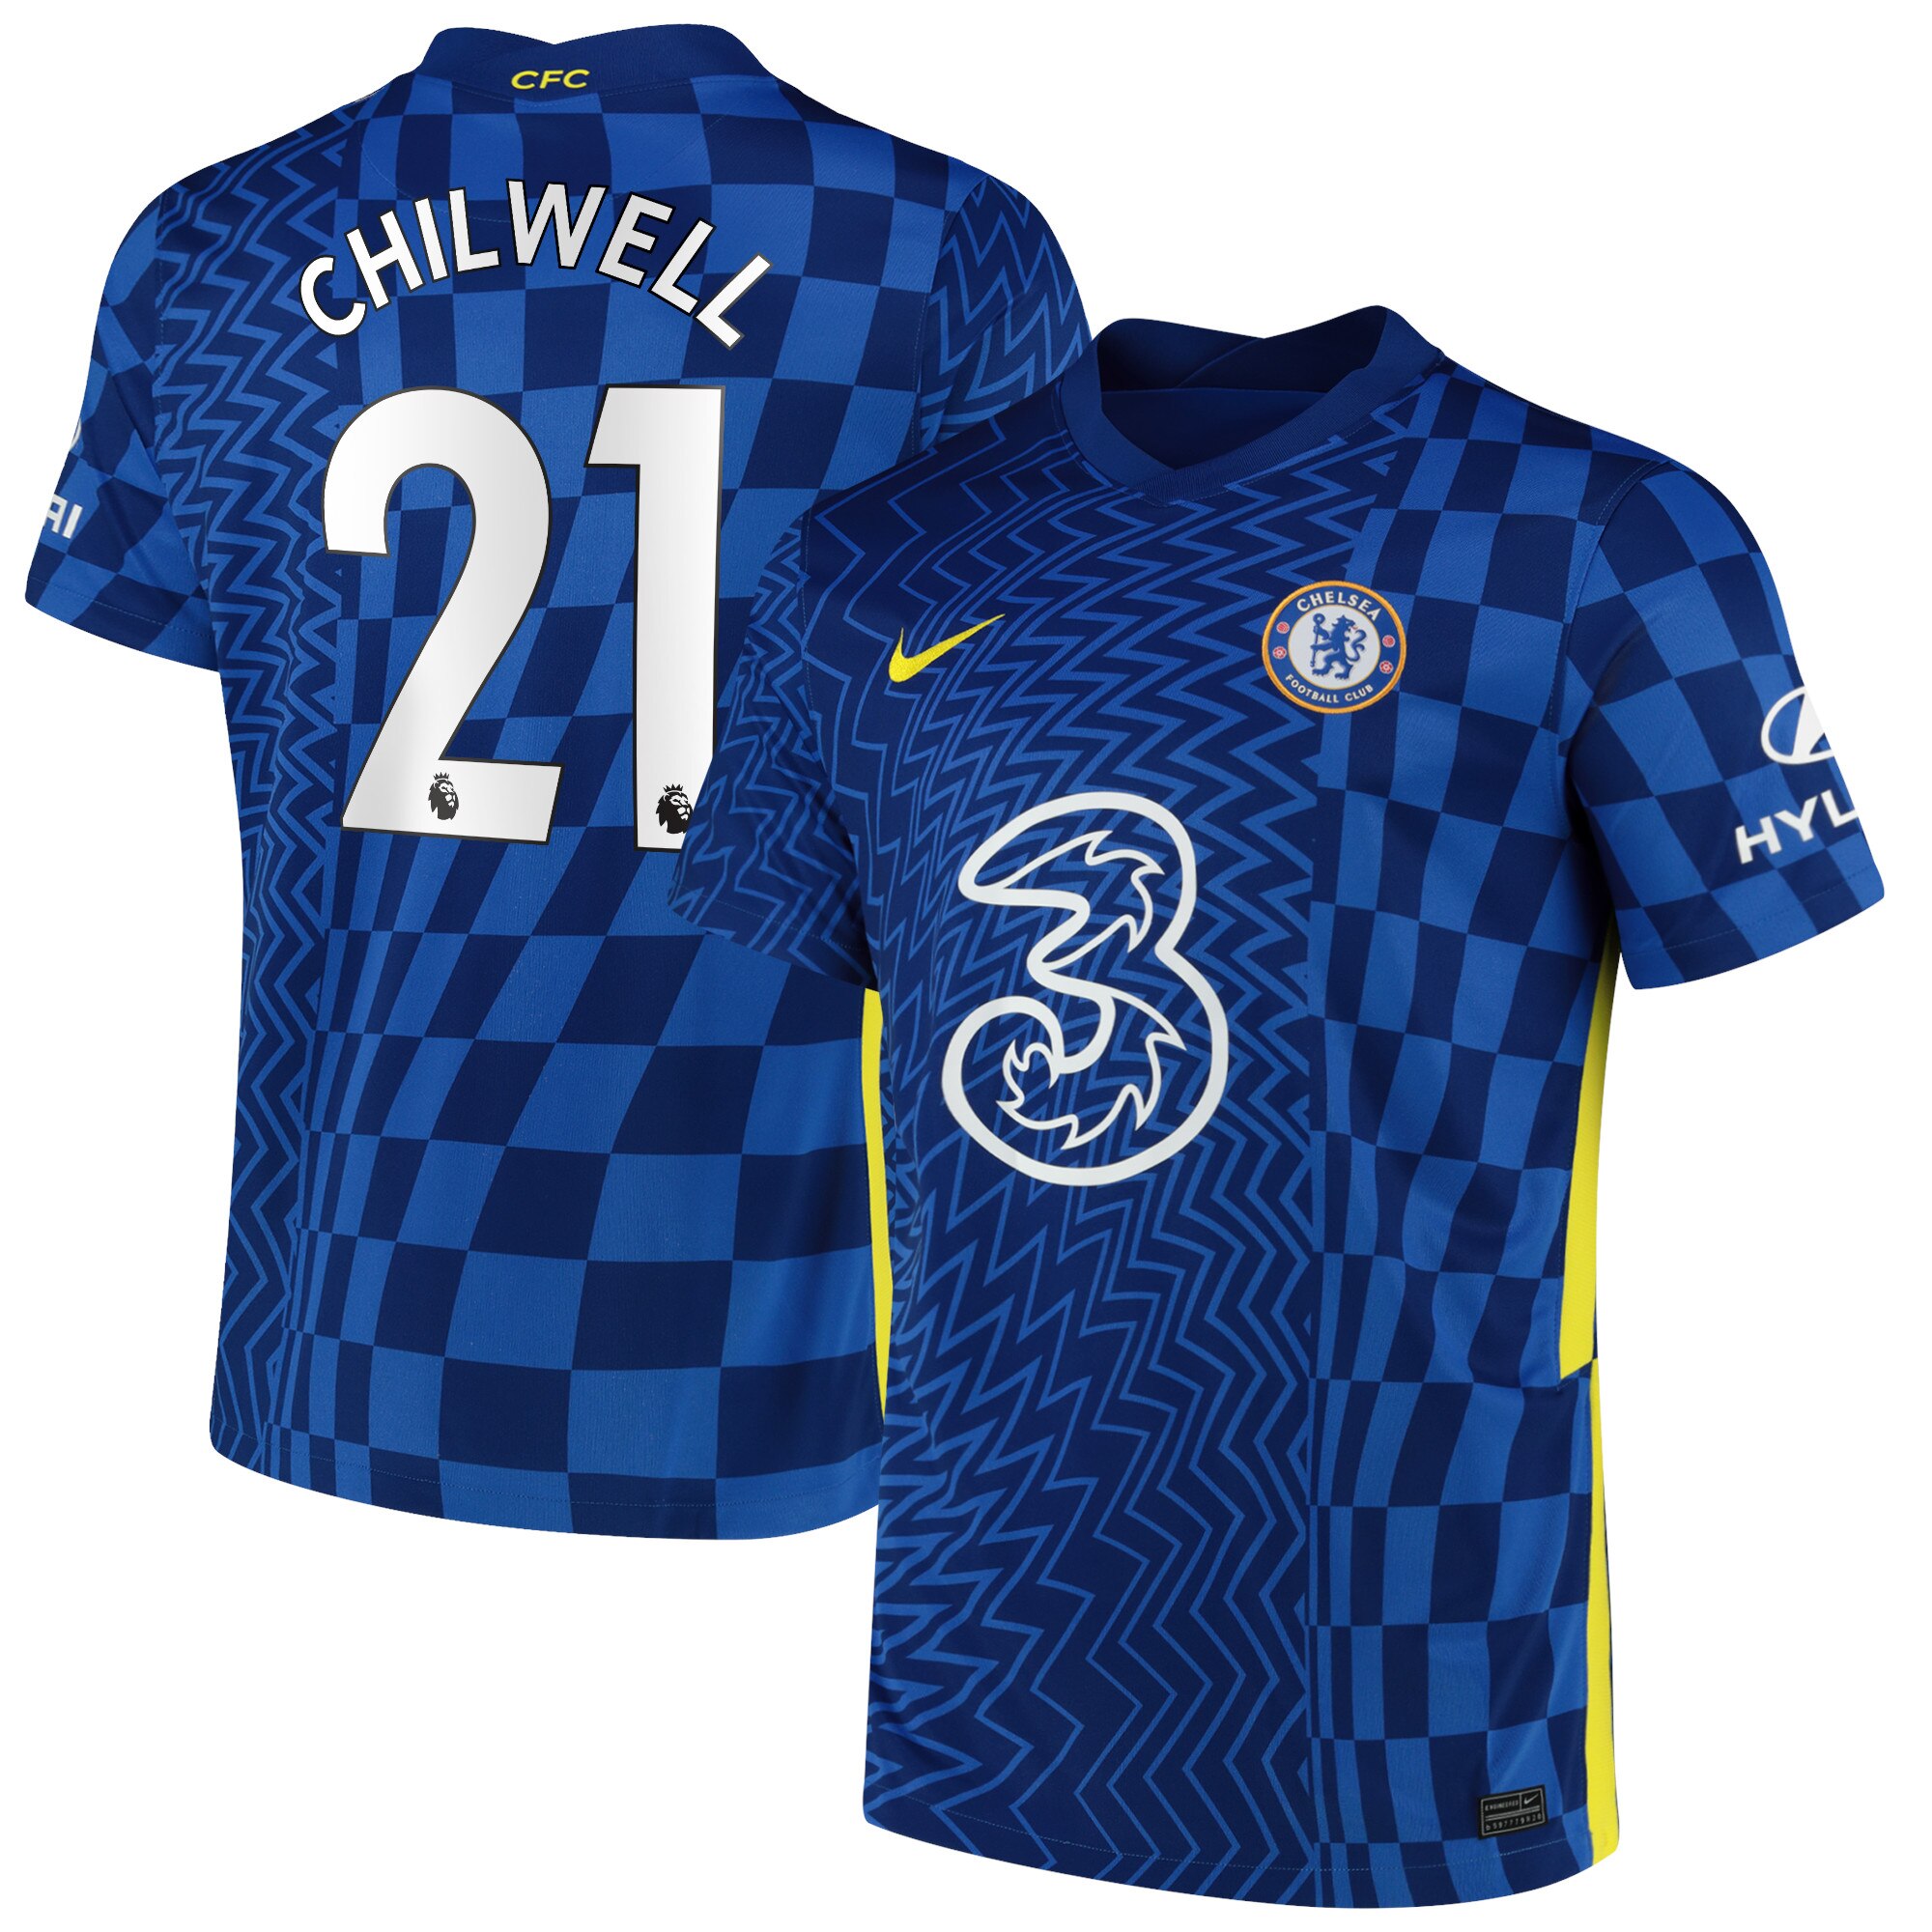 Chelsea Home Stadium Shirt 2021-22 with Chilwell 21 printing